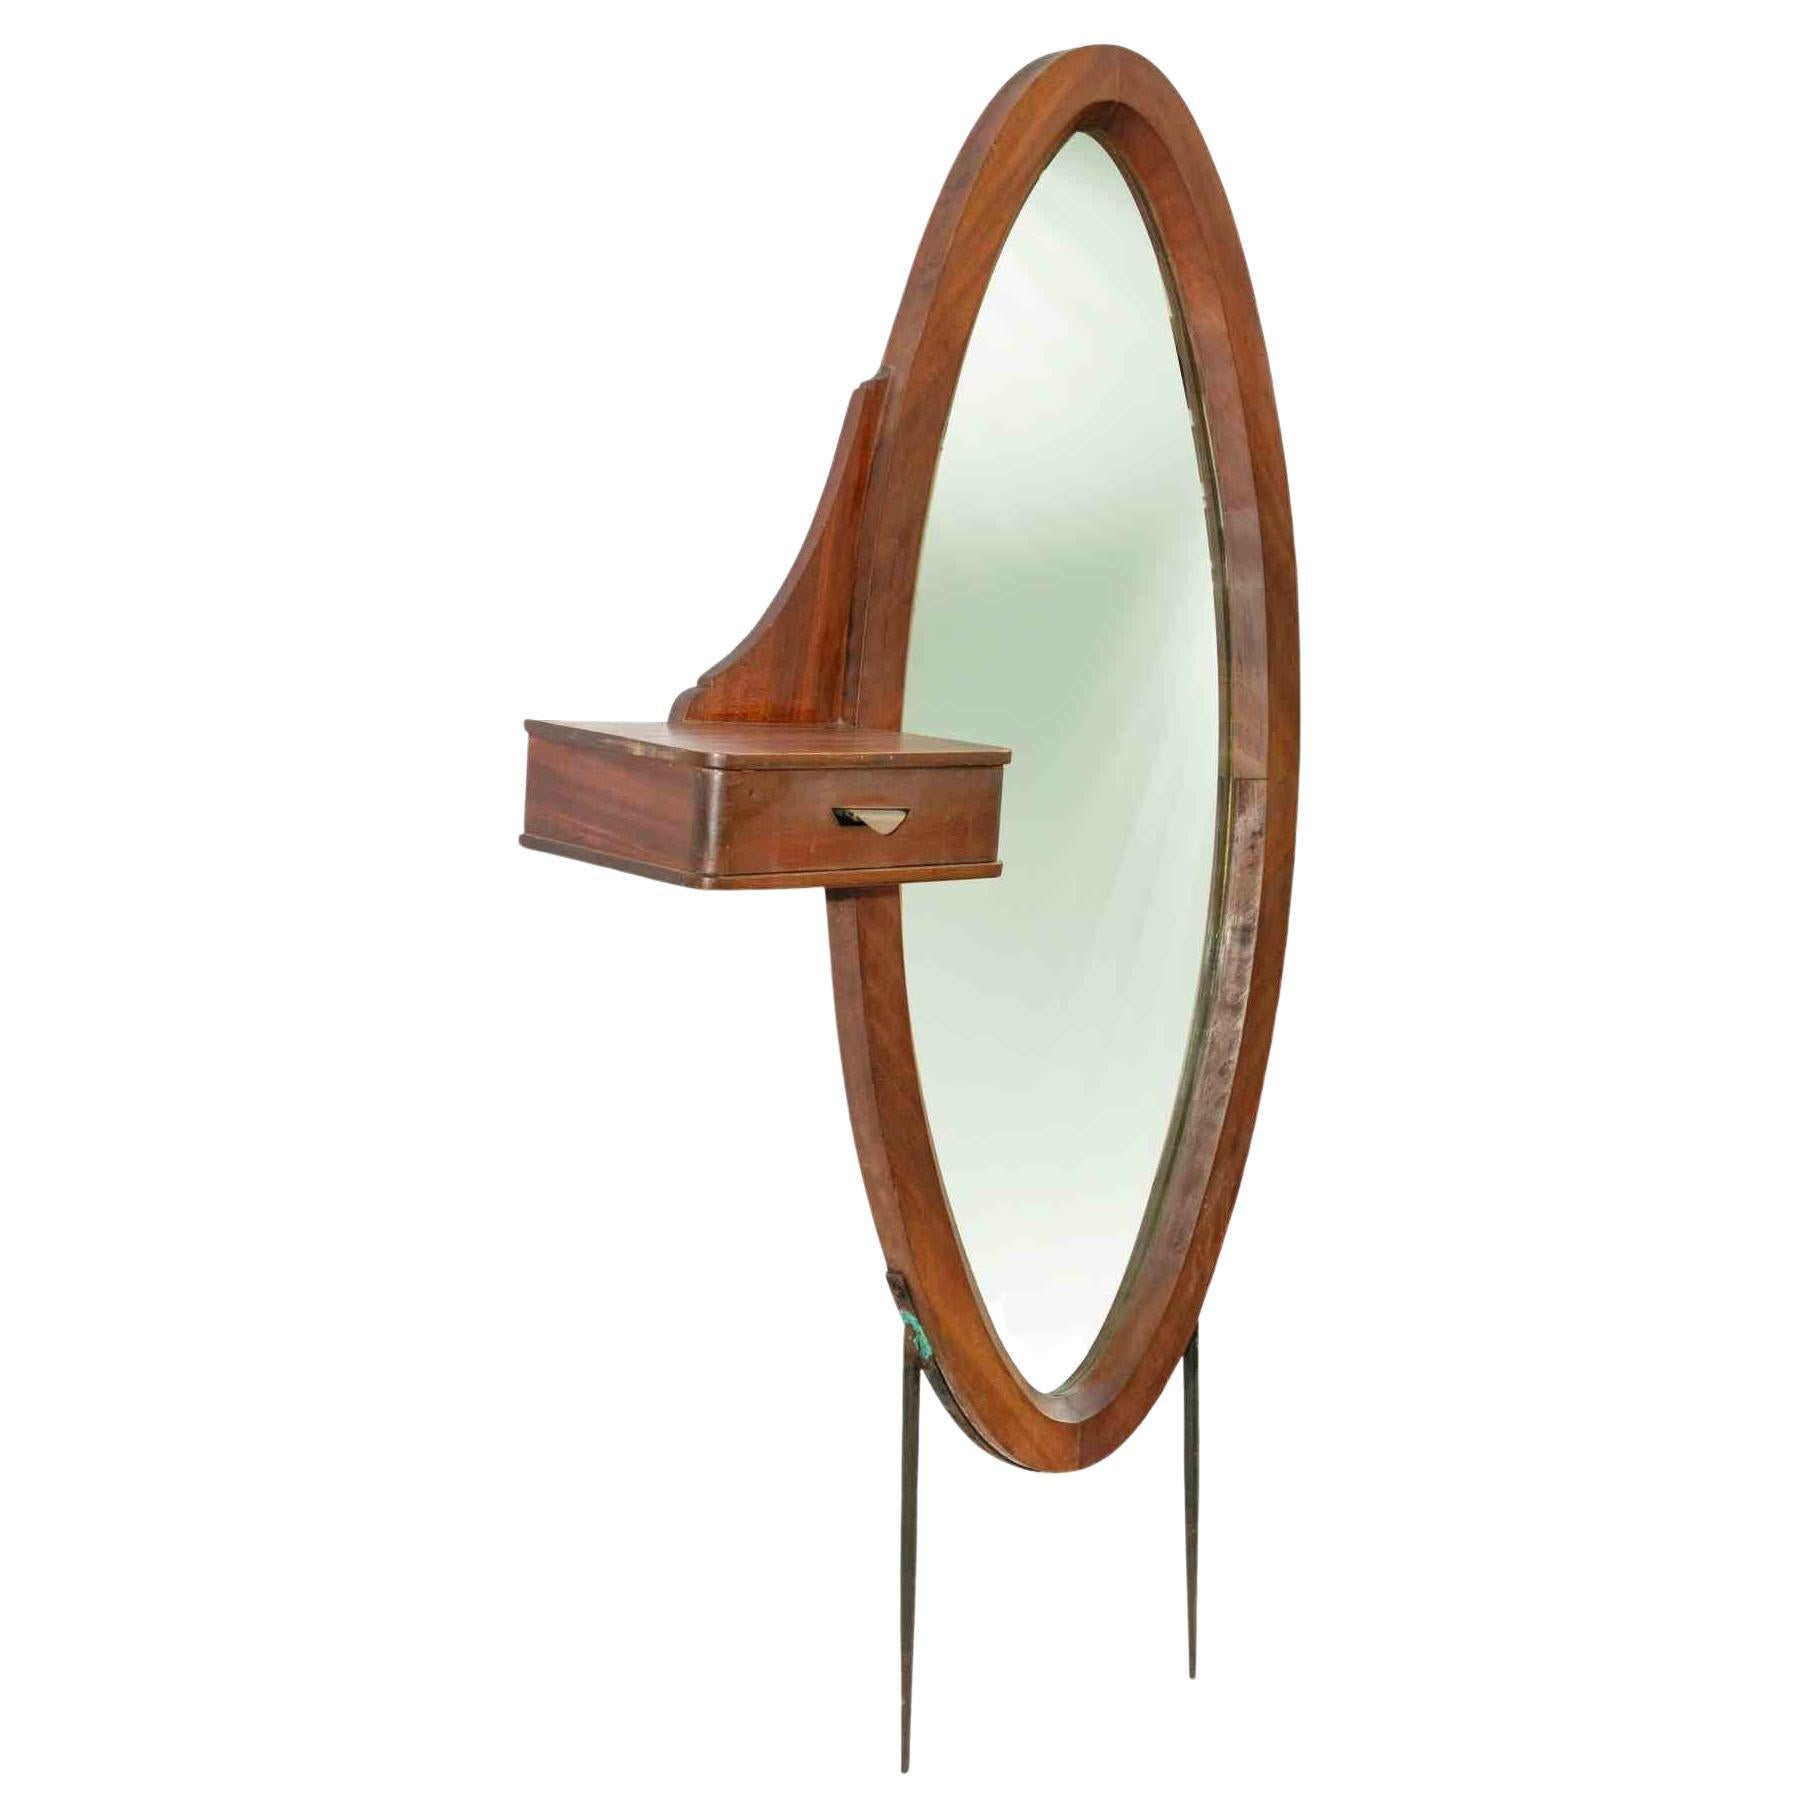 Vintage oval mirror is an original design item realized in the mid-20th century.

A vintage wooden mirror with a little drawer. Can be mounted with or without legs.

Don't miss this design mirror